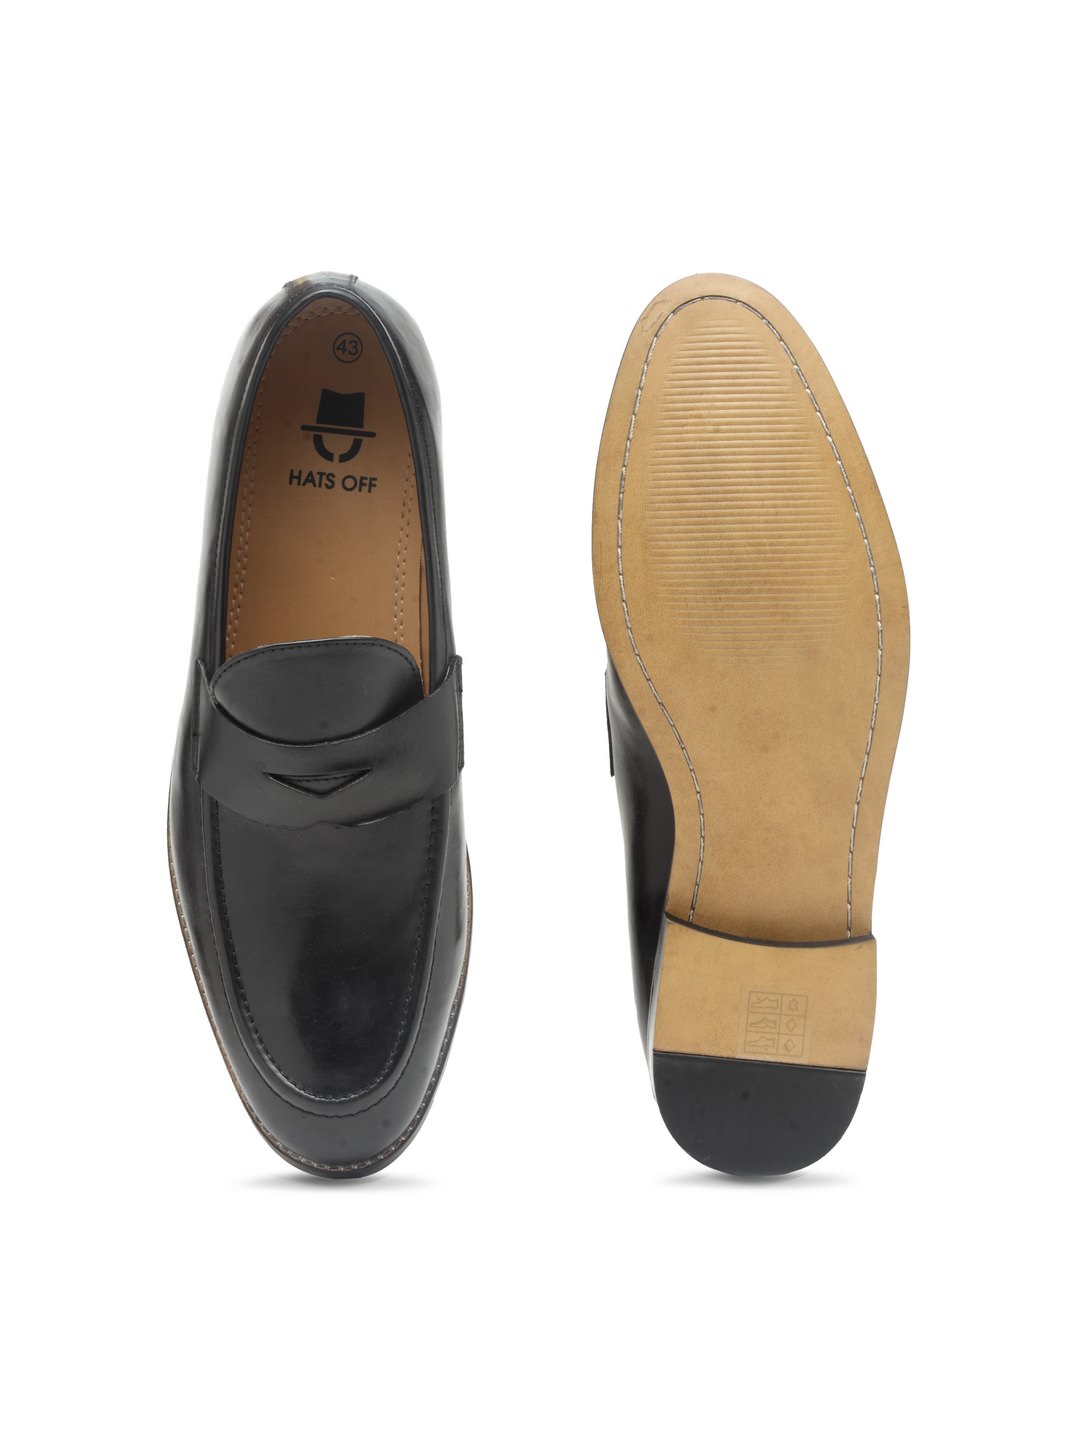 Buy Online Classic Penny Loafers Shoes in India by Hats Off Accessories